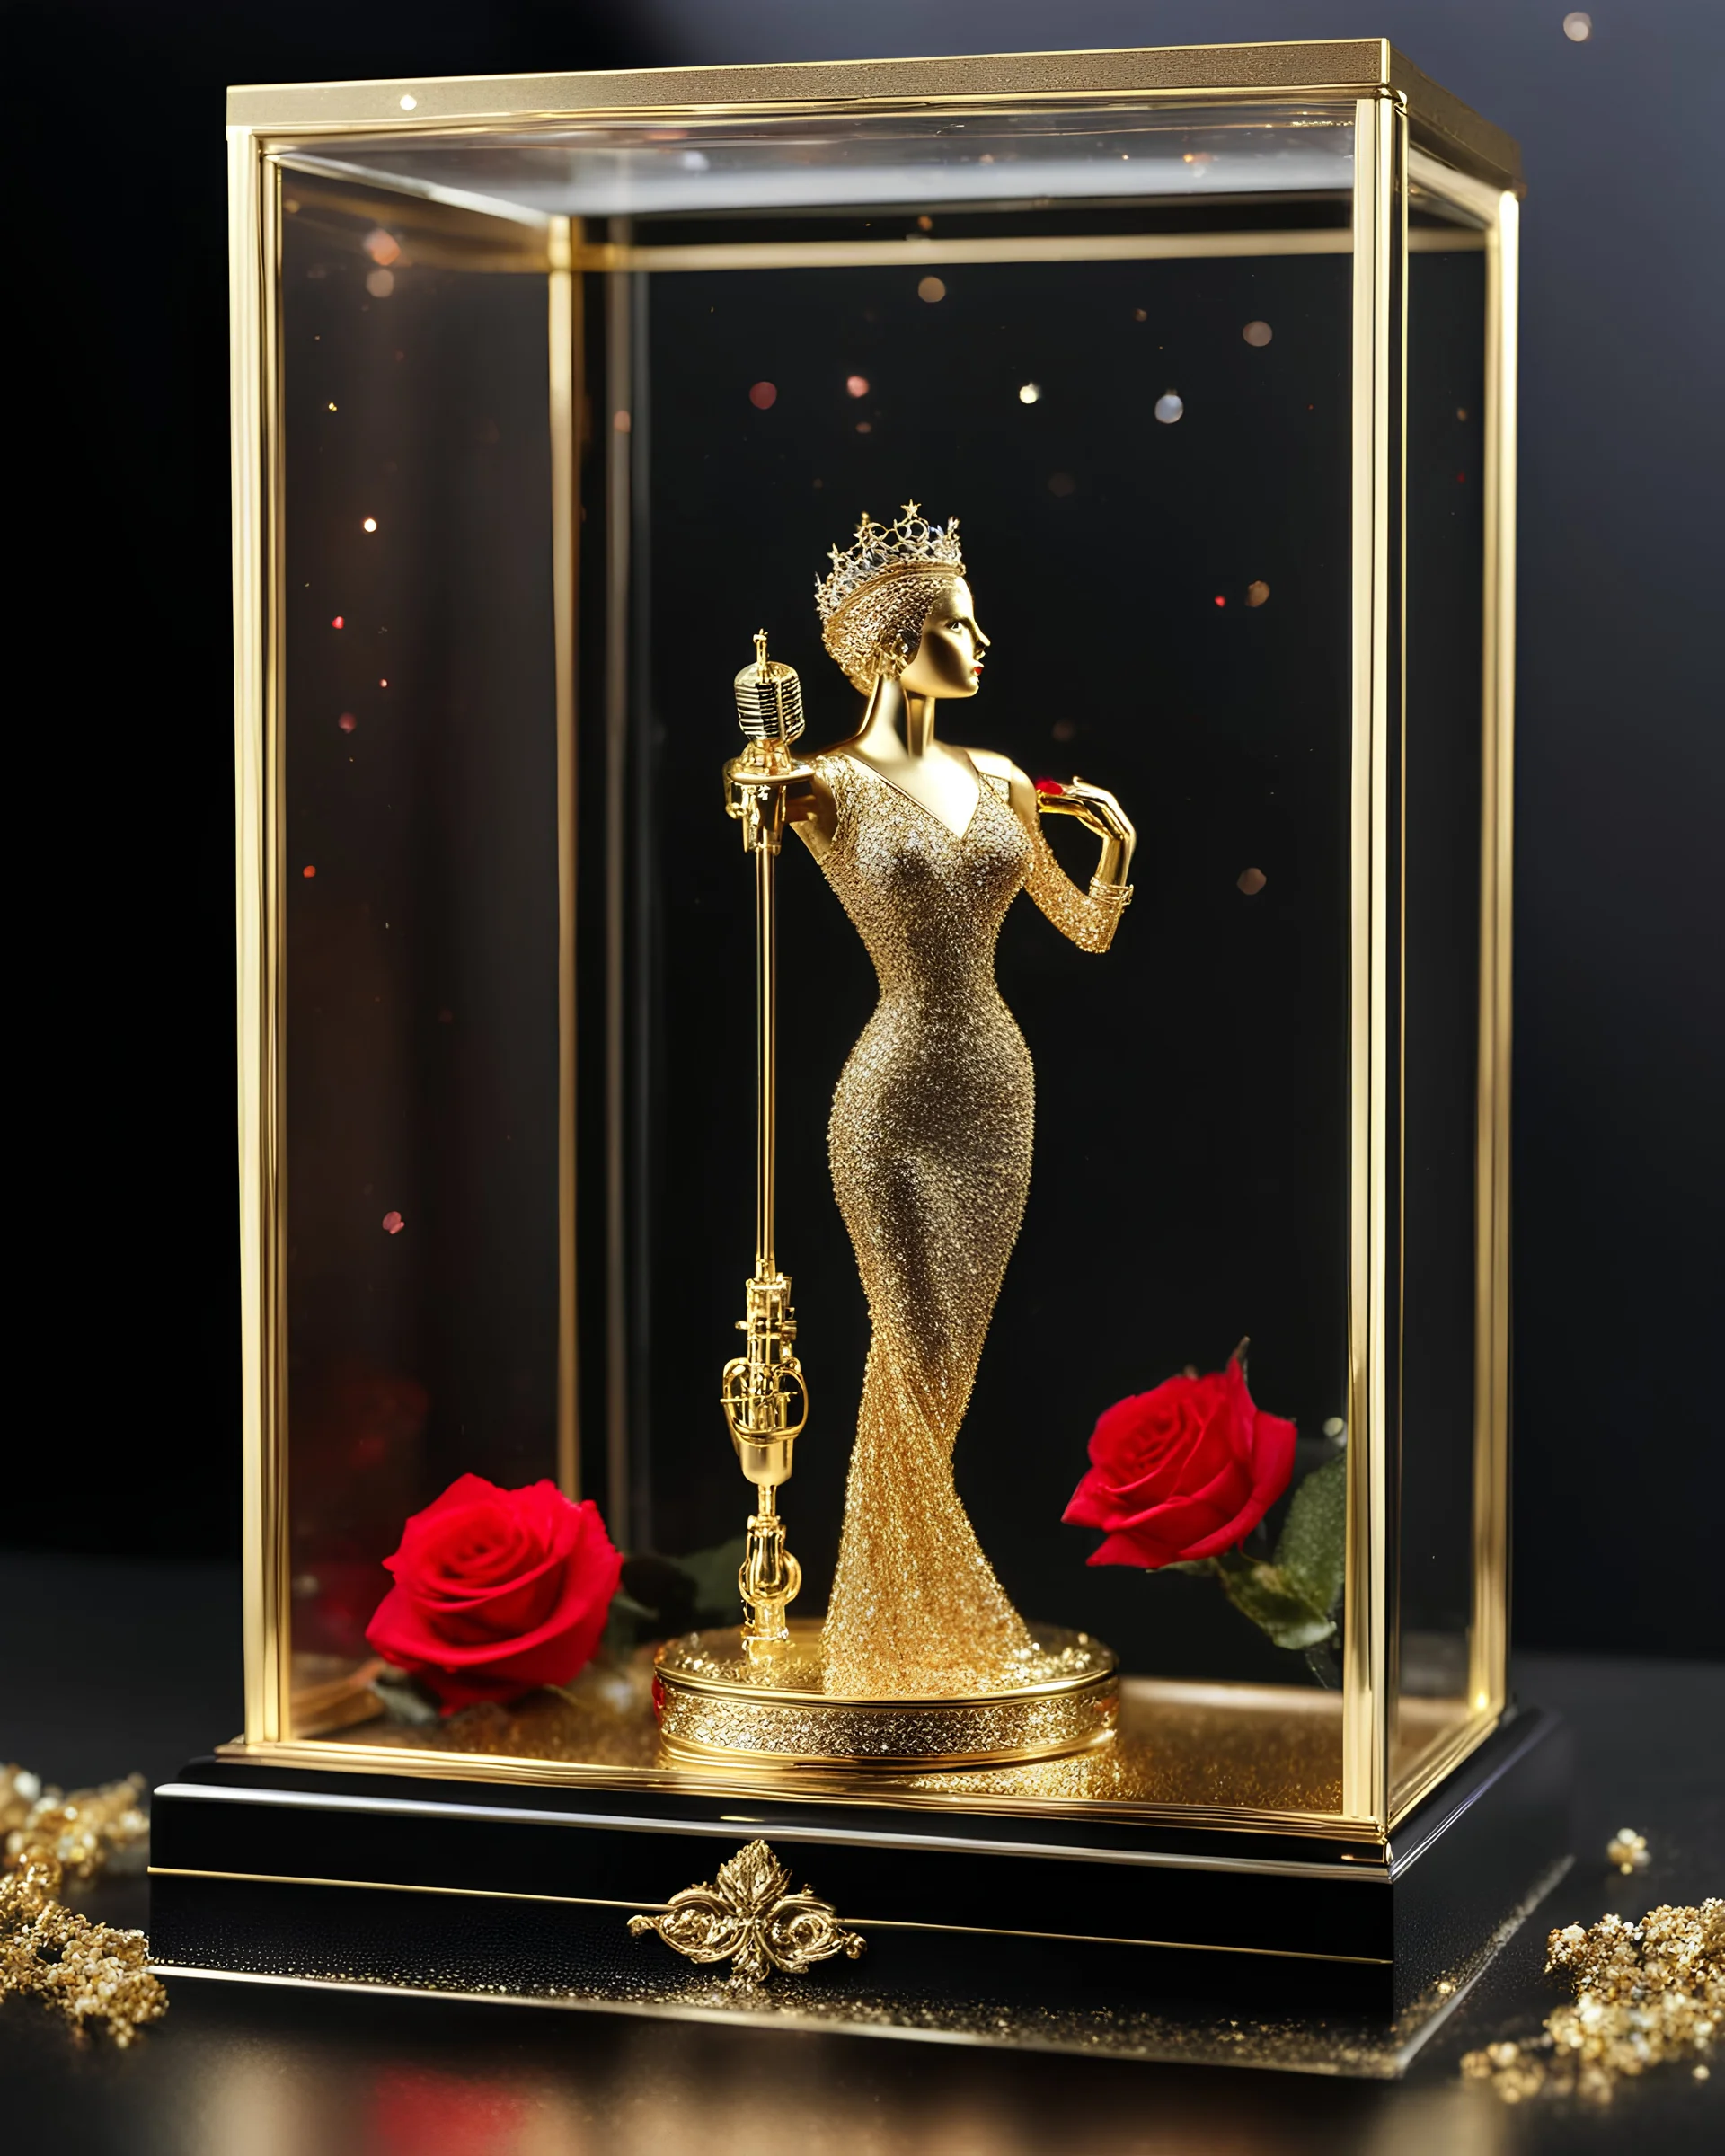 Luxury design of miniature singer music in a luxury glass box display case, singer music, microphone,made of gold metal plate, metal craft with luminous diamond glitter, on the outside surface of luxury jewelry decoration very small diamond stones, very small abstract queen logo, 3D logo shape, musical notes, red diamond stones, black decoration, leaves and roses combined, emitting light, gold background